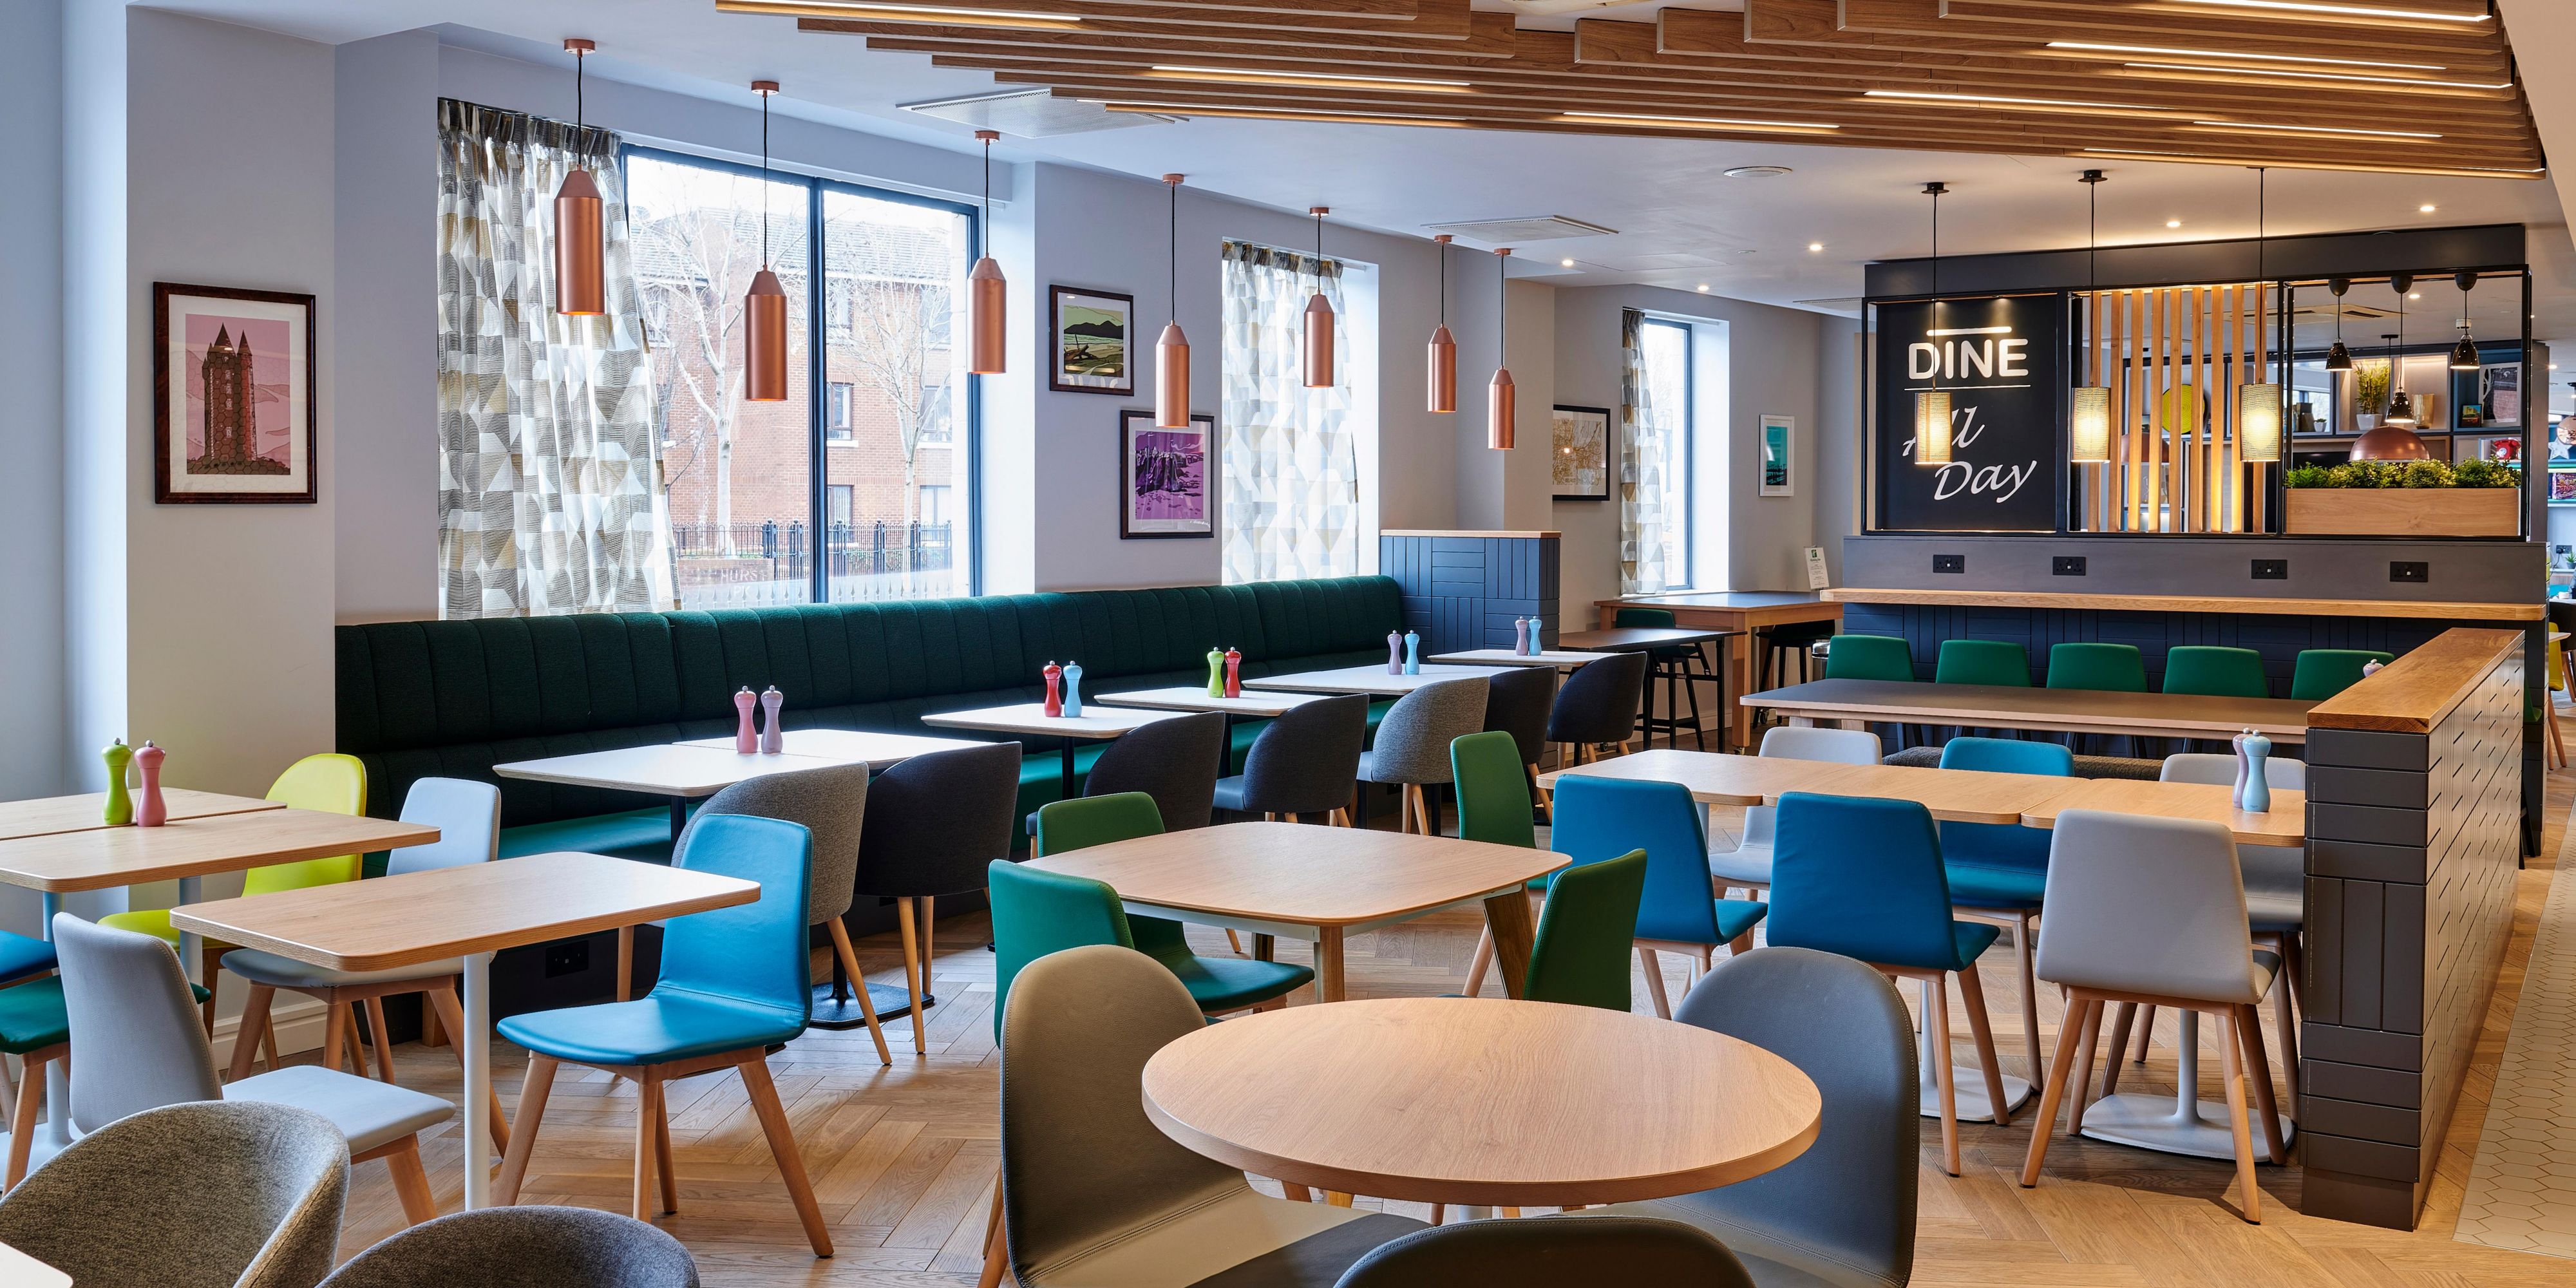 Holiday Inn Belfast serves delicious dinner and lunch options